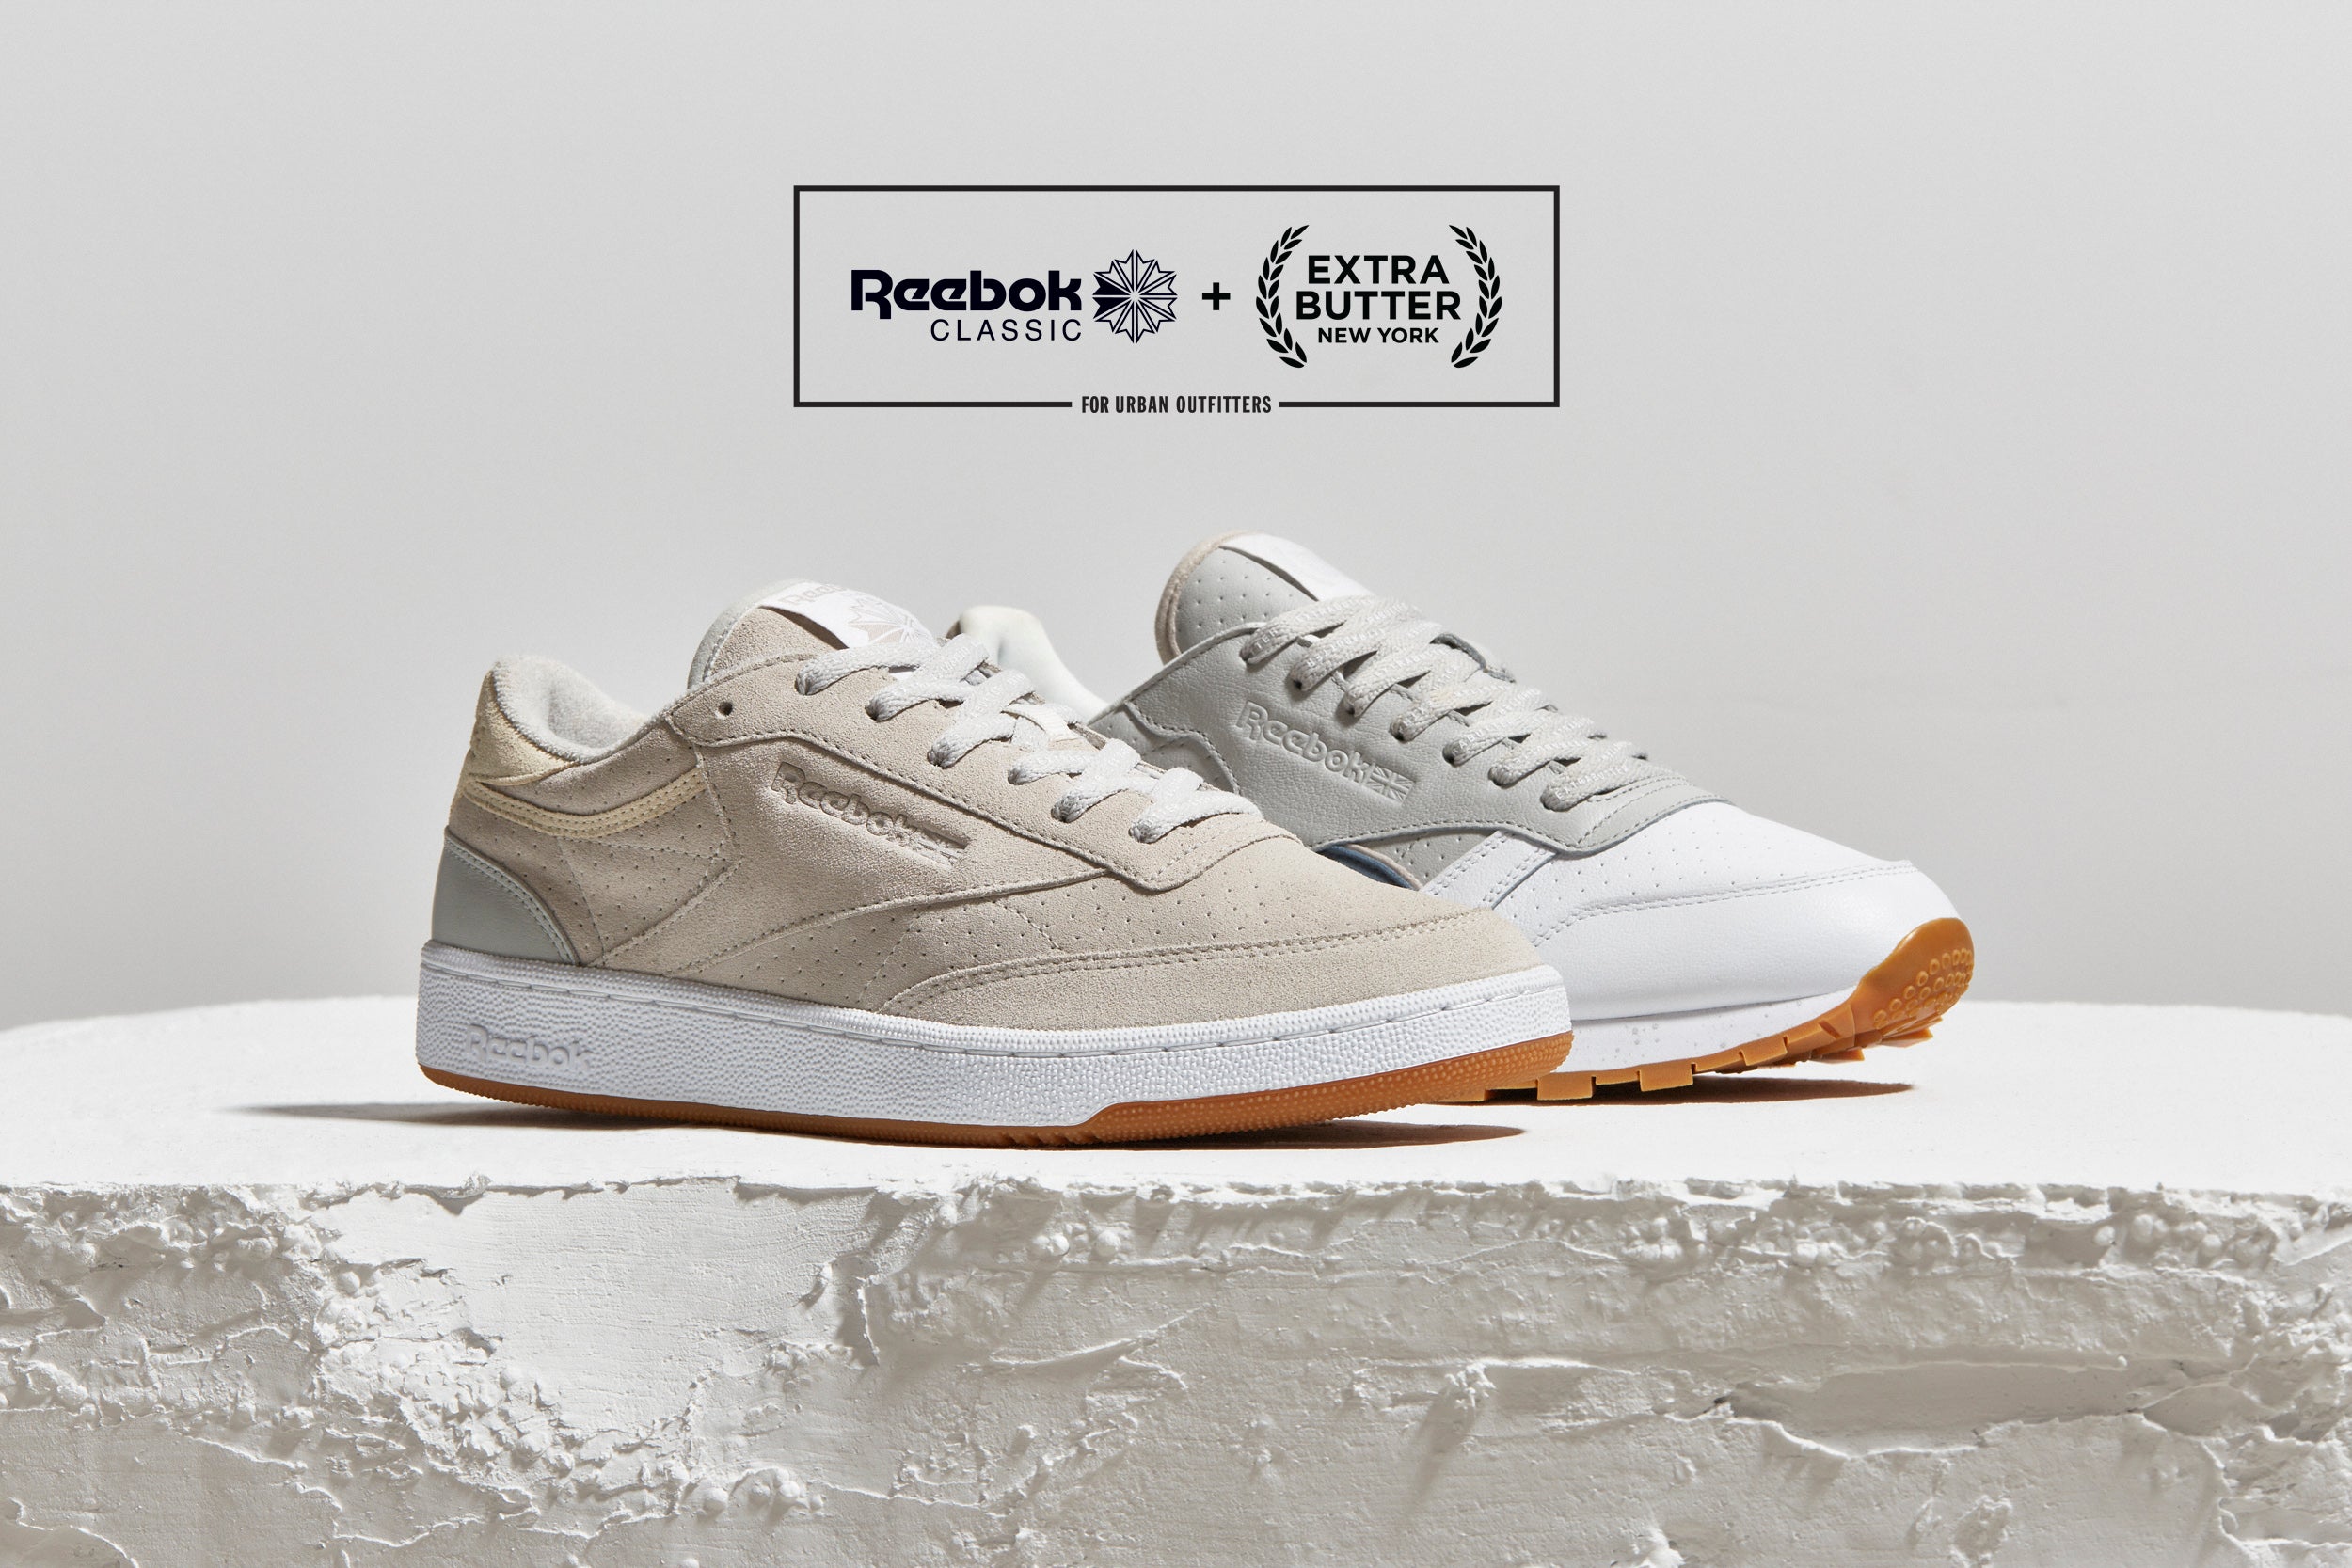 Extra Butter x Reebok Classics x Urban Outfitters card image